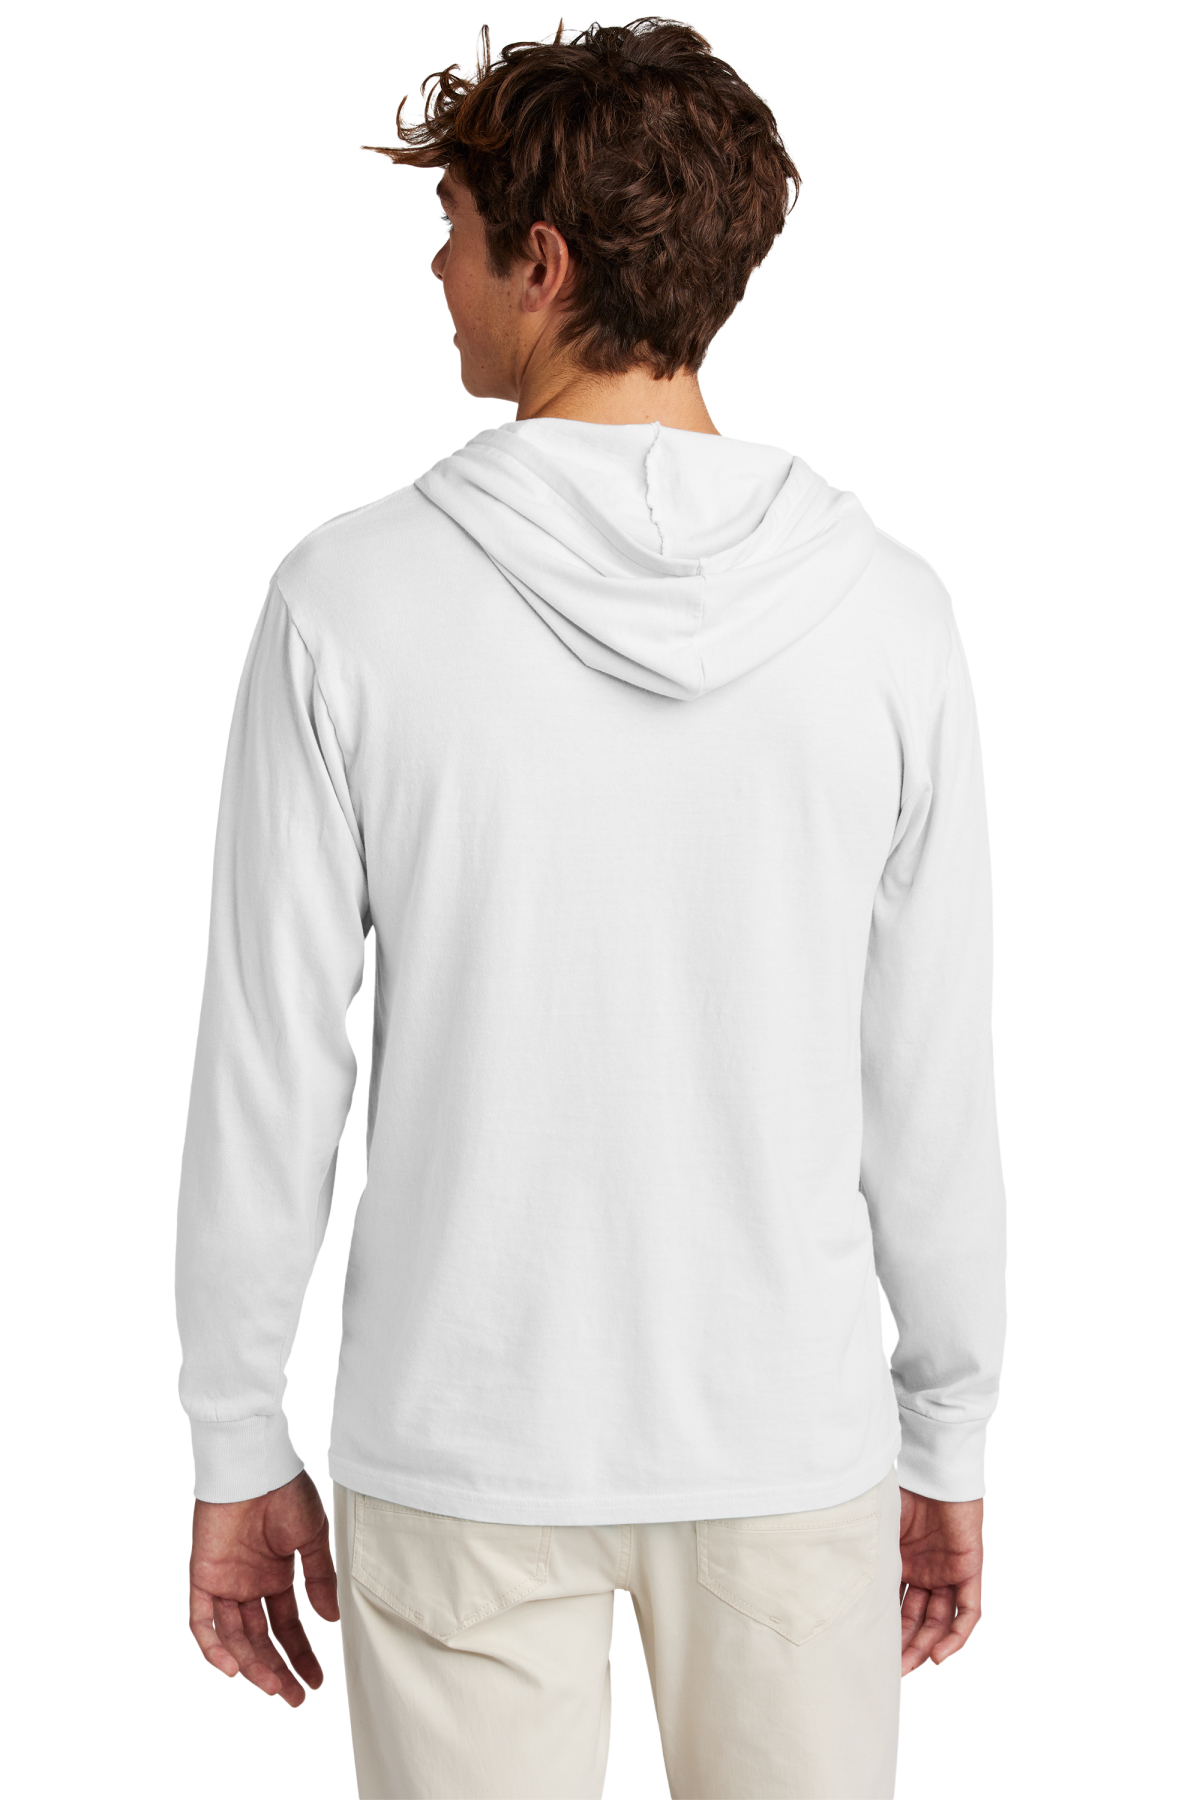 Port & Company Beach Wash Garment-Dyed Pullover Hooded Tee | Product ...